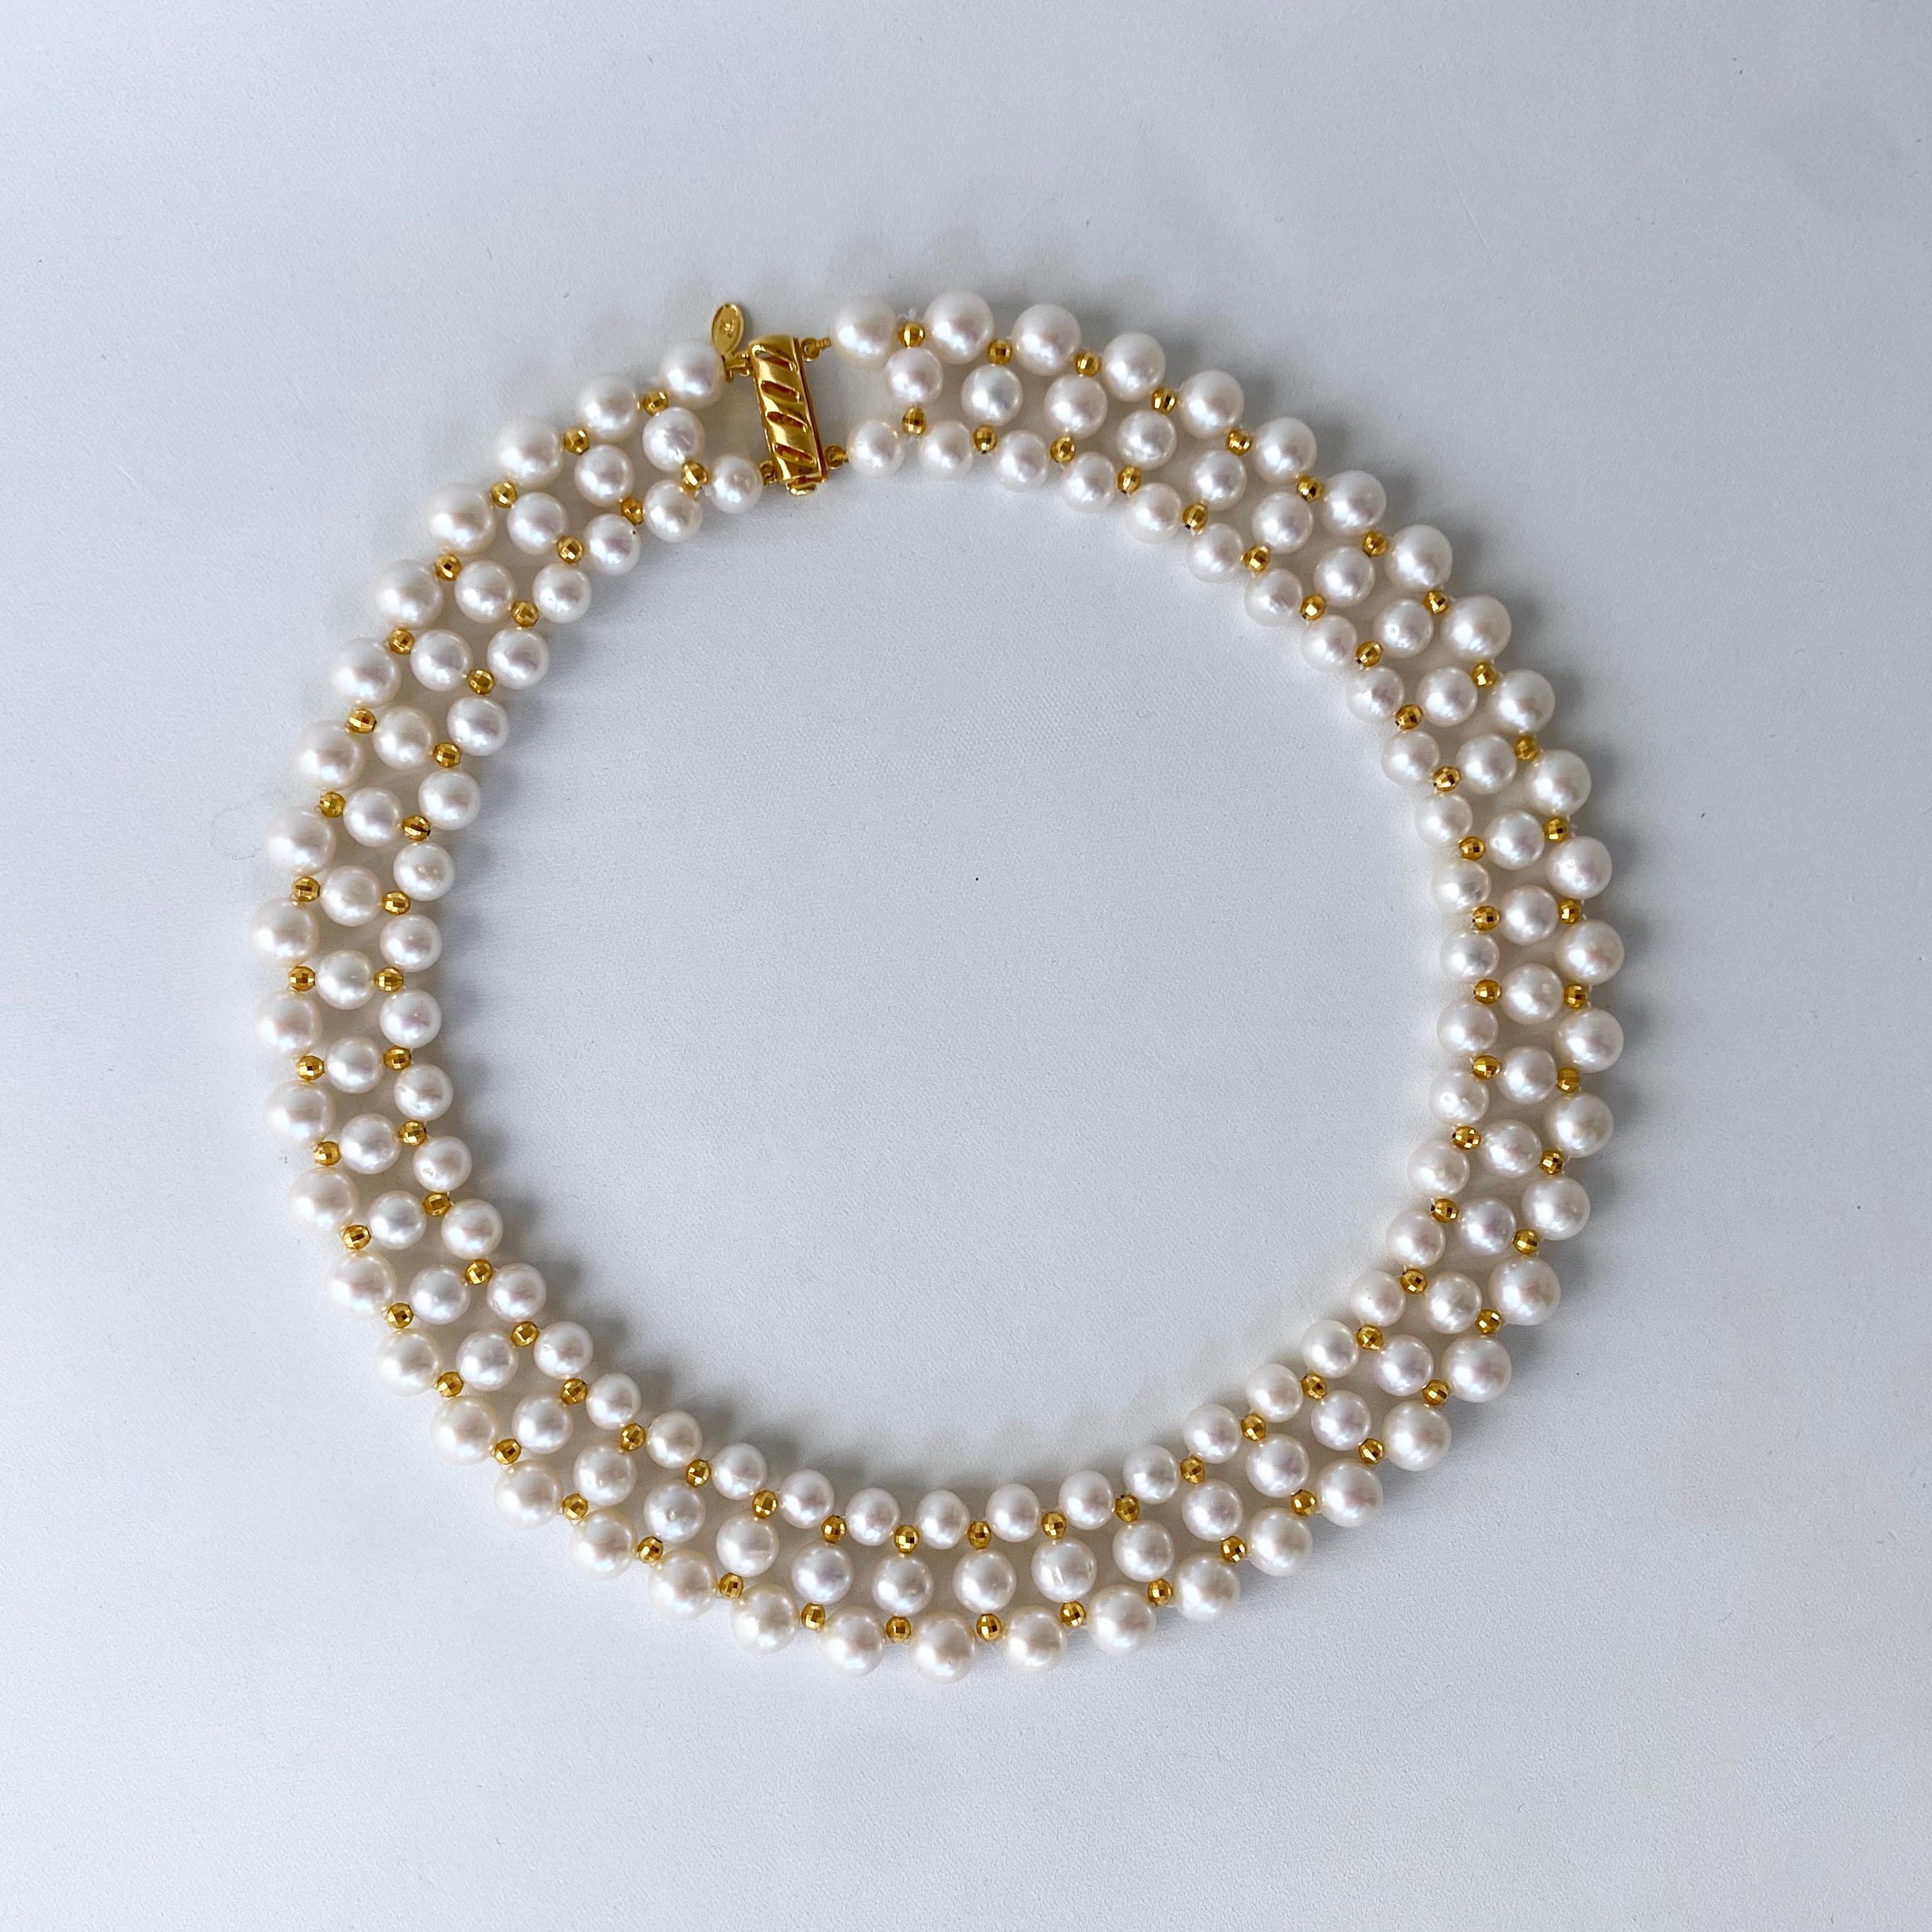 Gorgeous Pearl Woven necklace adorned by 14k Yellow Gold Plated - Silver Faceted beads. Three strands of Pearls, graduating in size, are woven together into a soft Lace design, inspired by old world jewelry. Faceted 14k Yellow Gold Plated - Silver